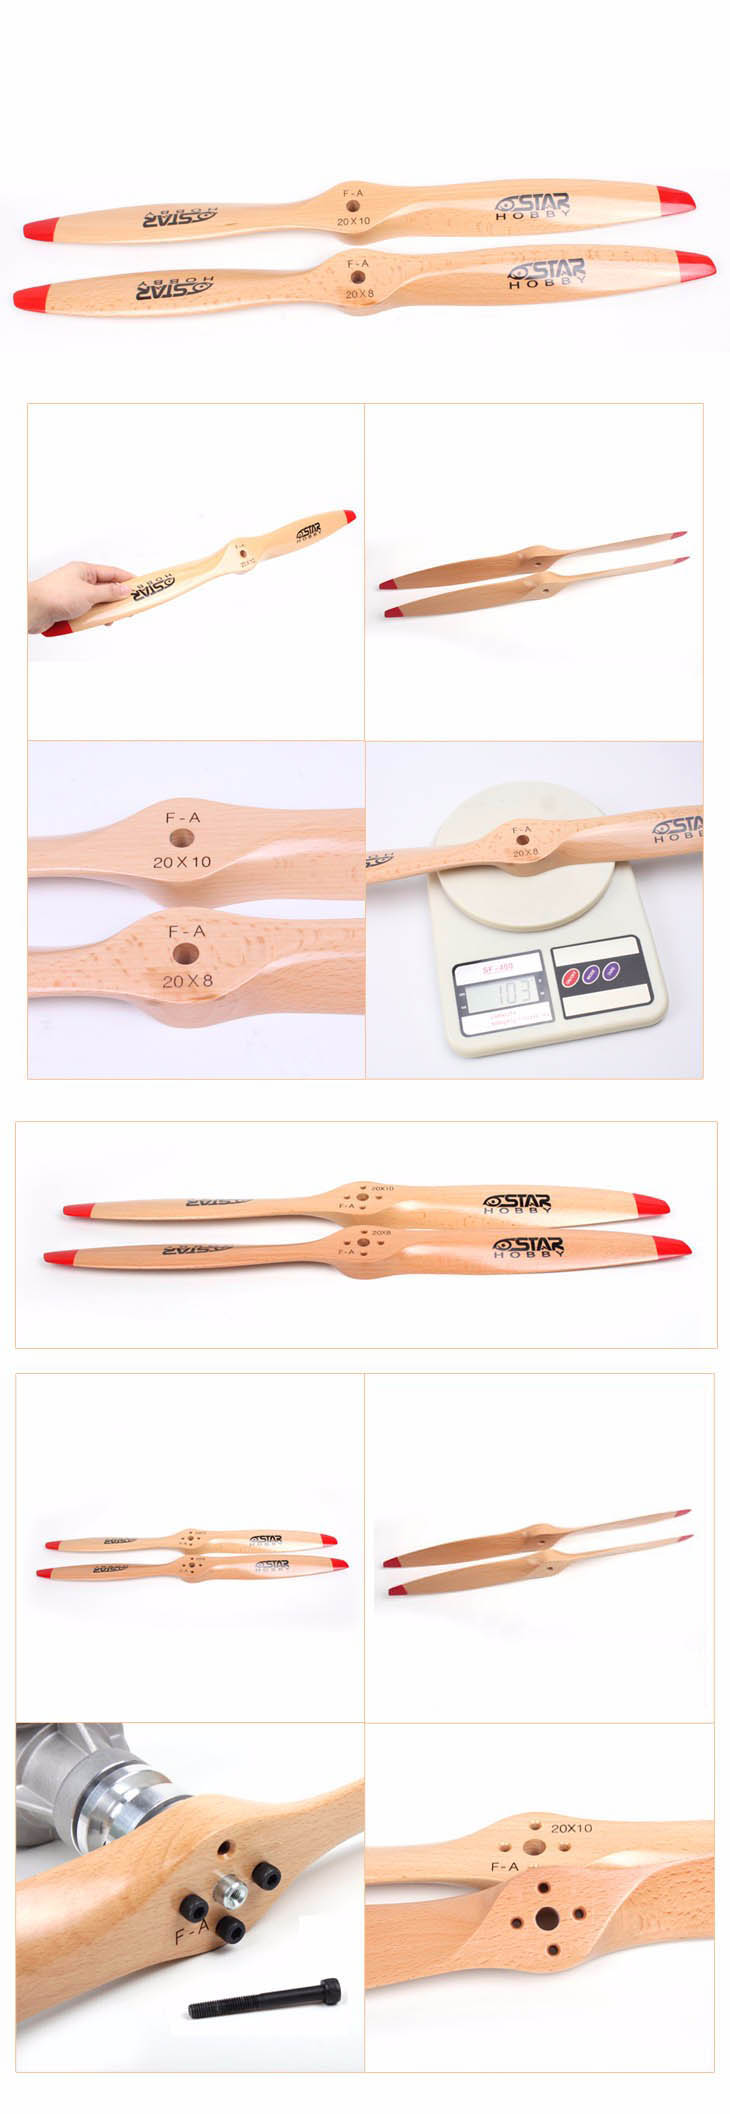 6STARHOBBY Standard Wooden Propeller/ Beech Propeller 20*8 20*10 for RC Gasoline Drilled Propellers Suiting DLE Series Engines